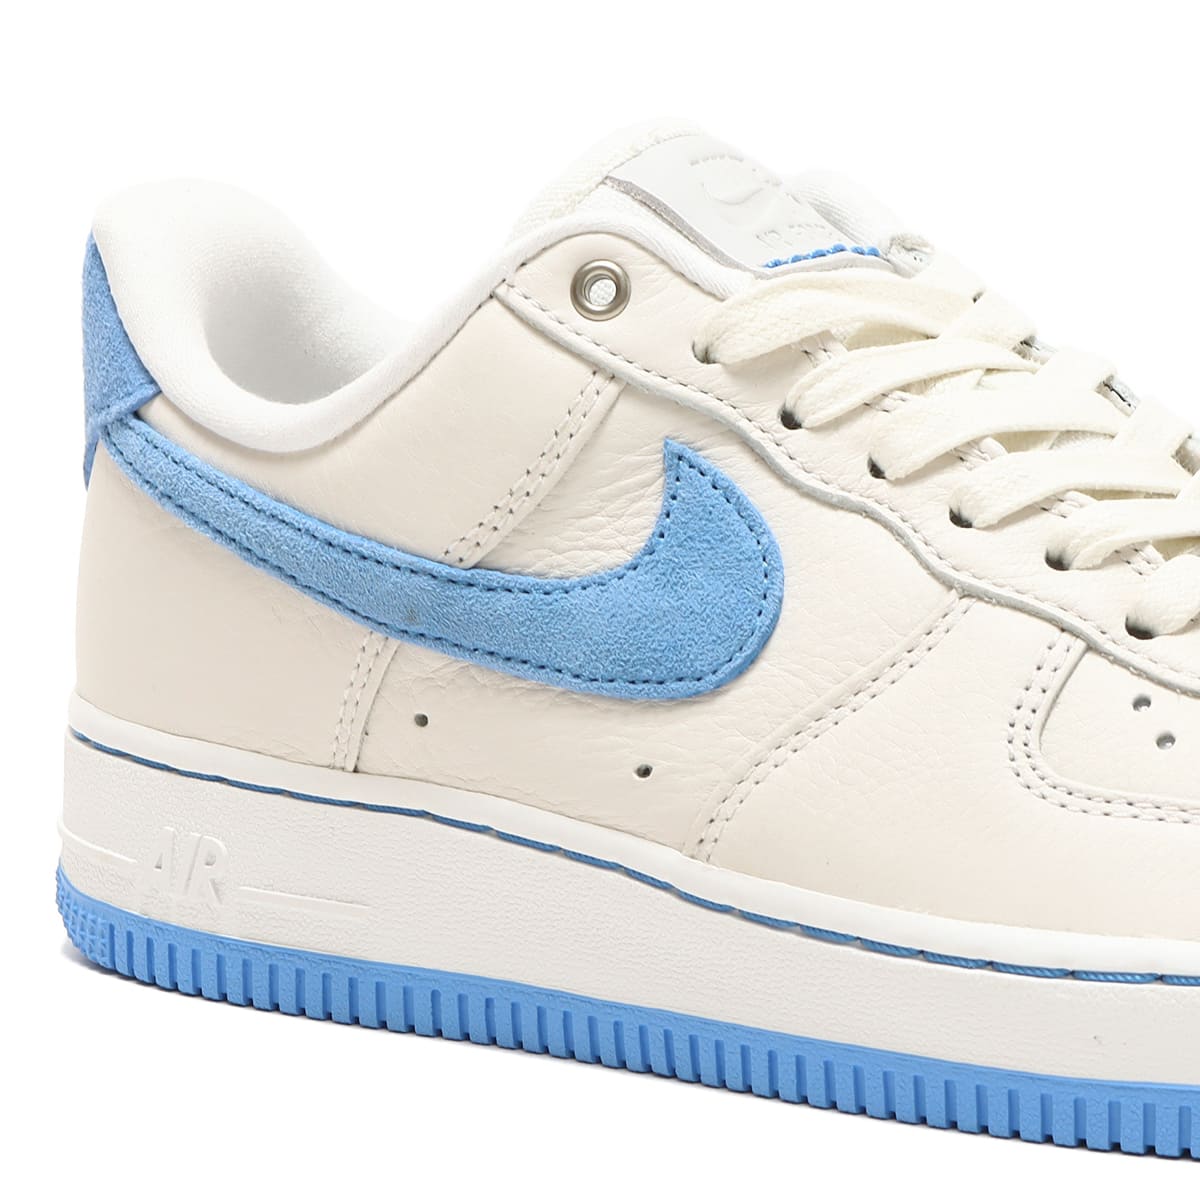 Nike Air Force 1 Low LXX "Summit White"